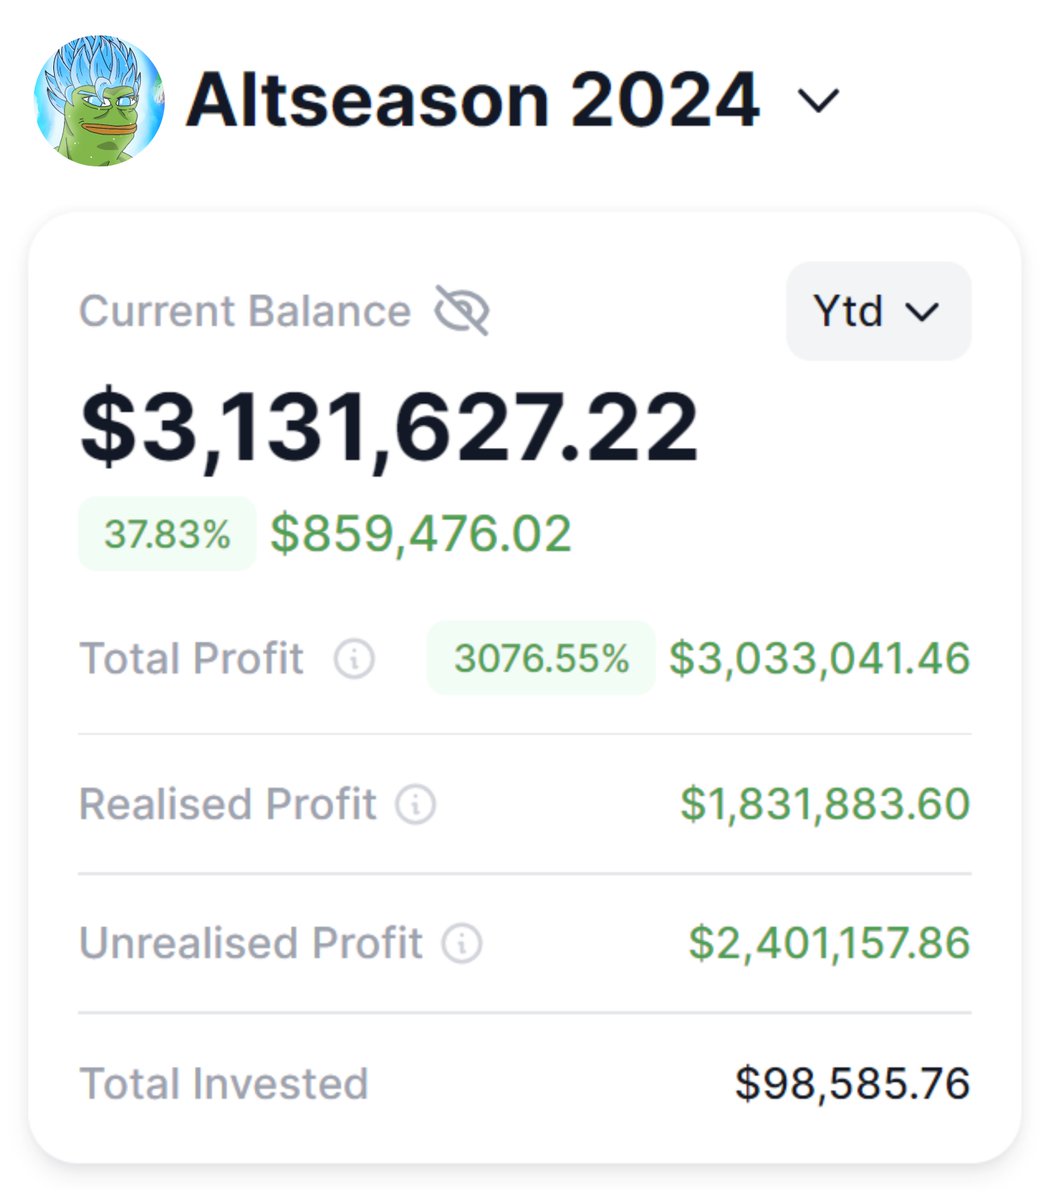 On past bulls I went from $5k to $270,000 and I didn't go down.

Five years of market experience led to profit taking near ATH.

But times have changed. Even pros will find it tough.

Here's the key to navigating the altseason successfully 🧵⬇️